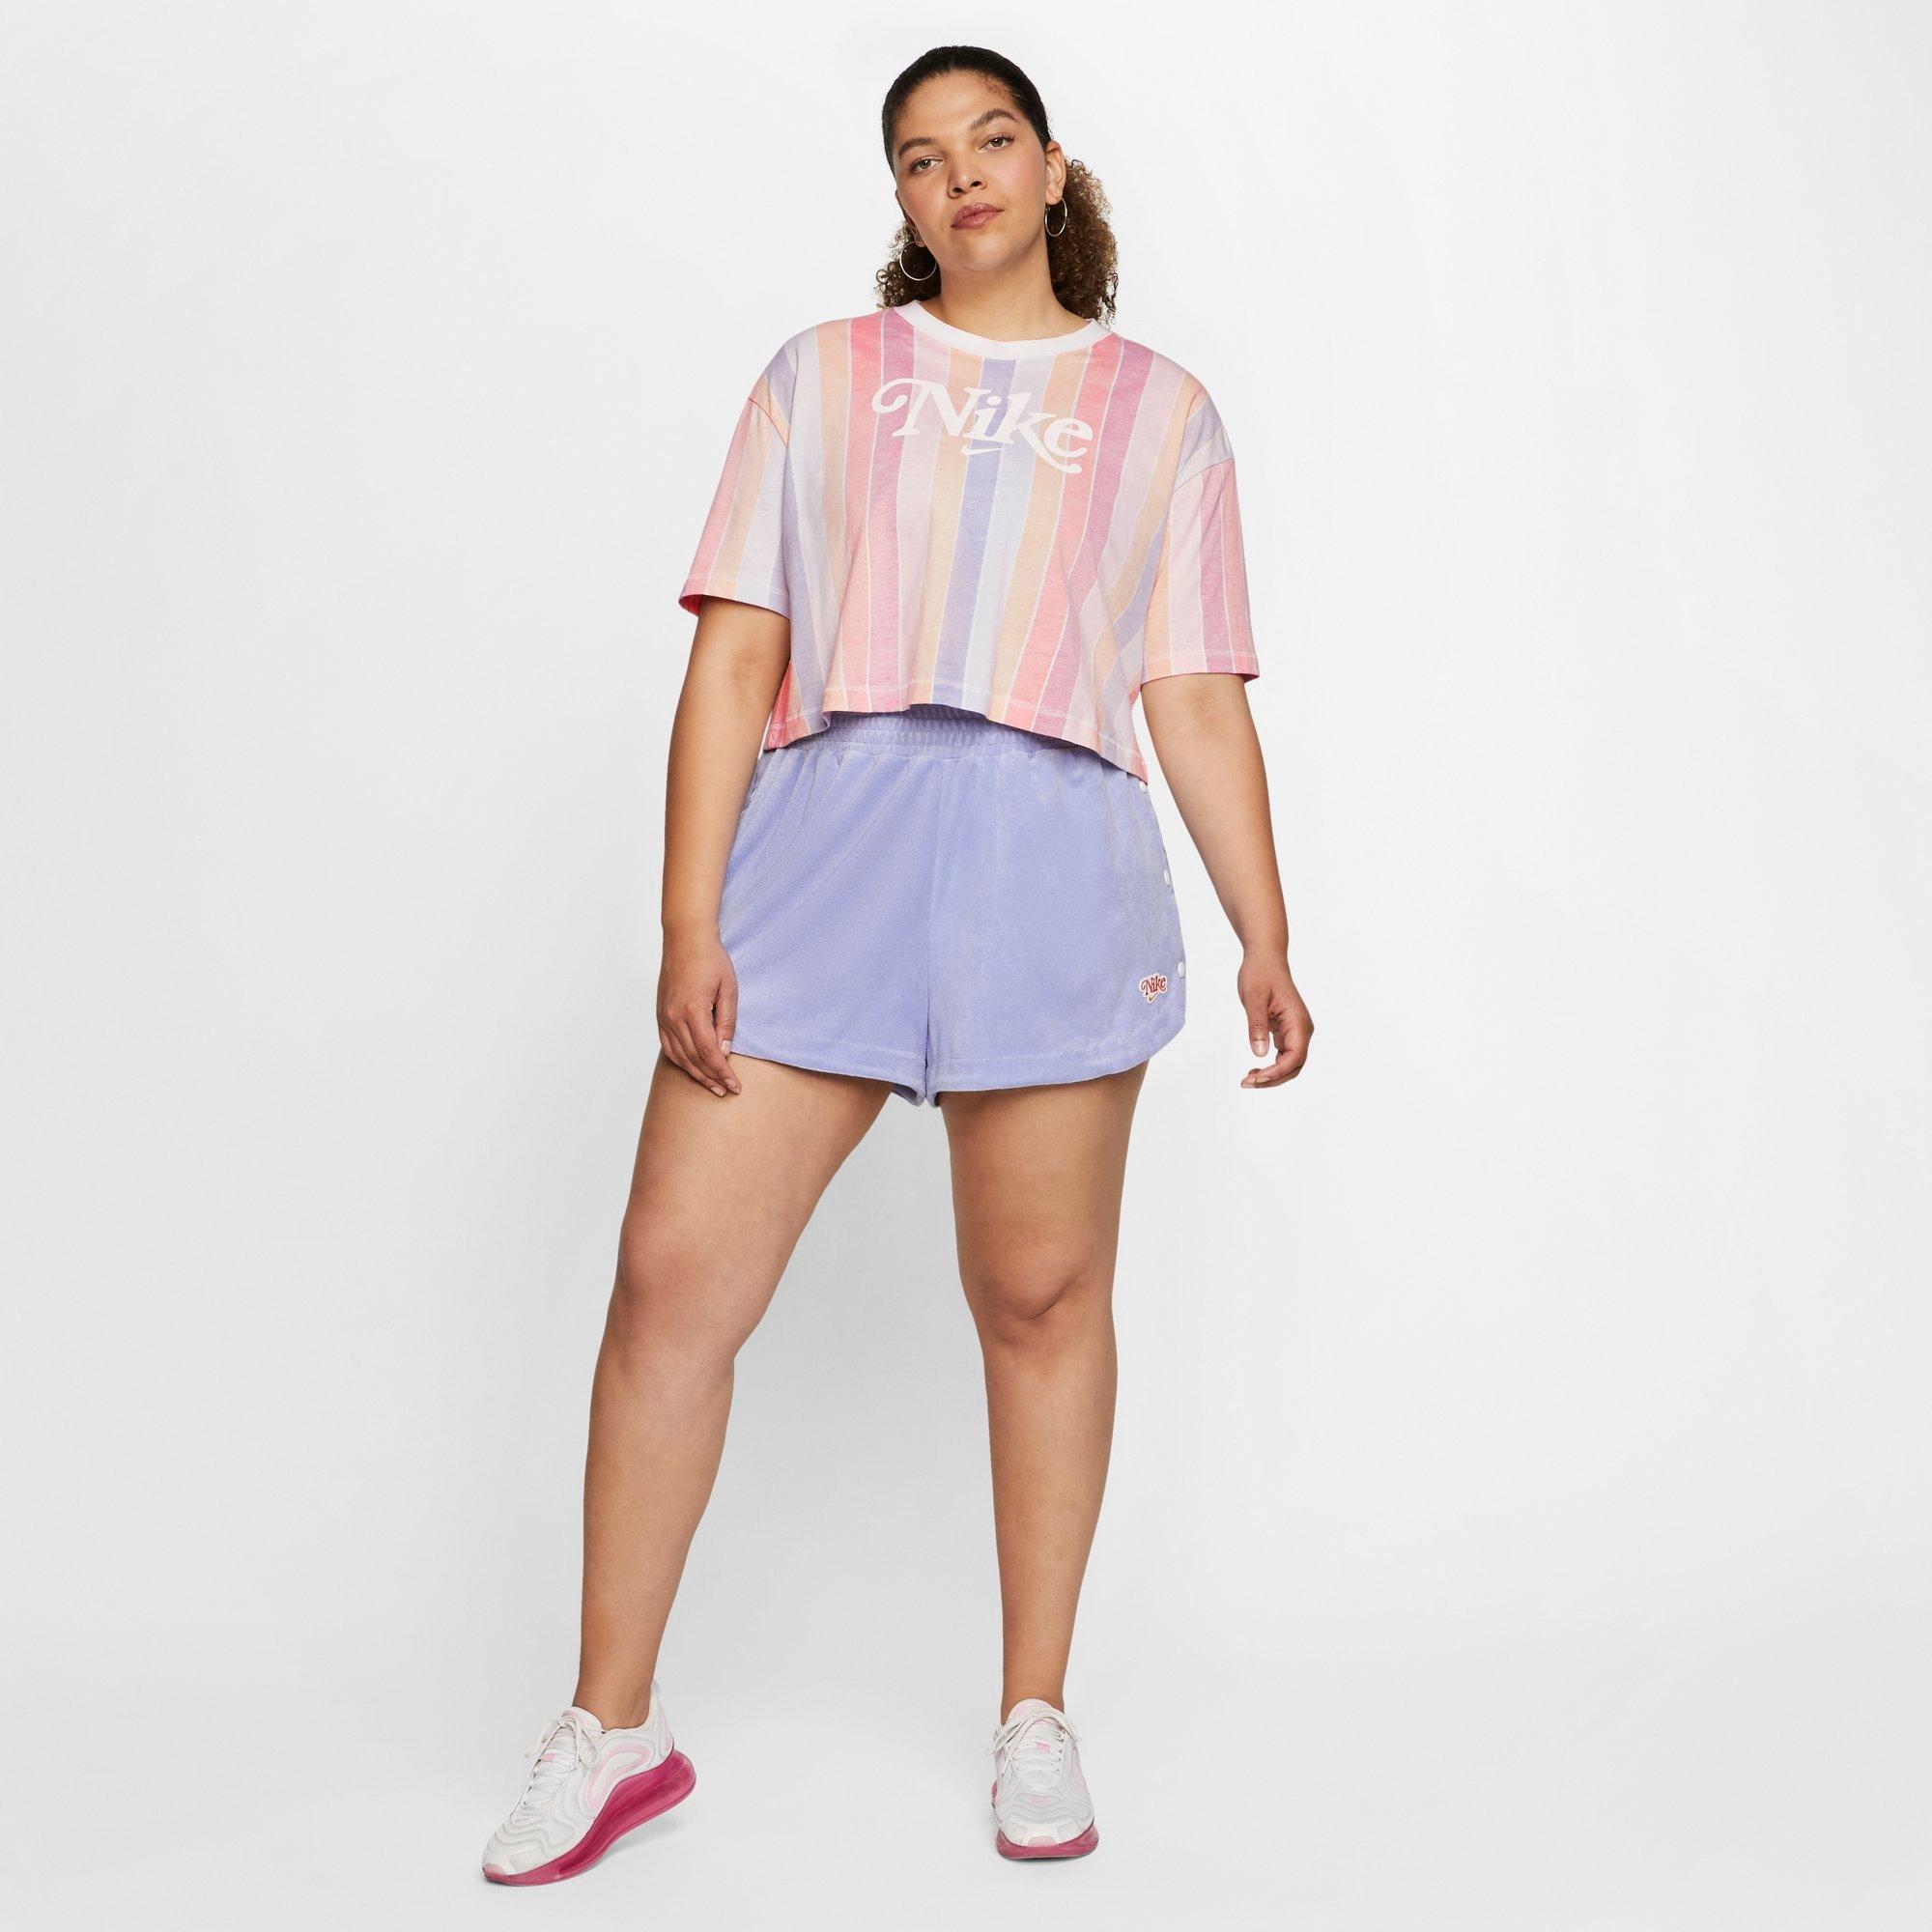 nike retro femme collection